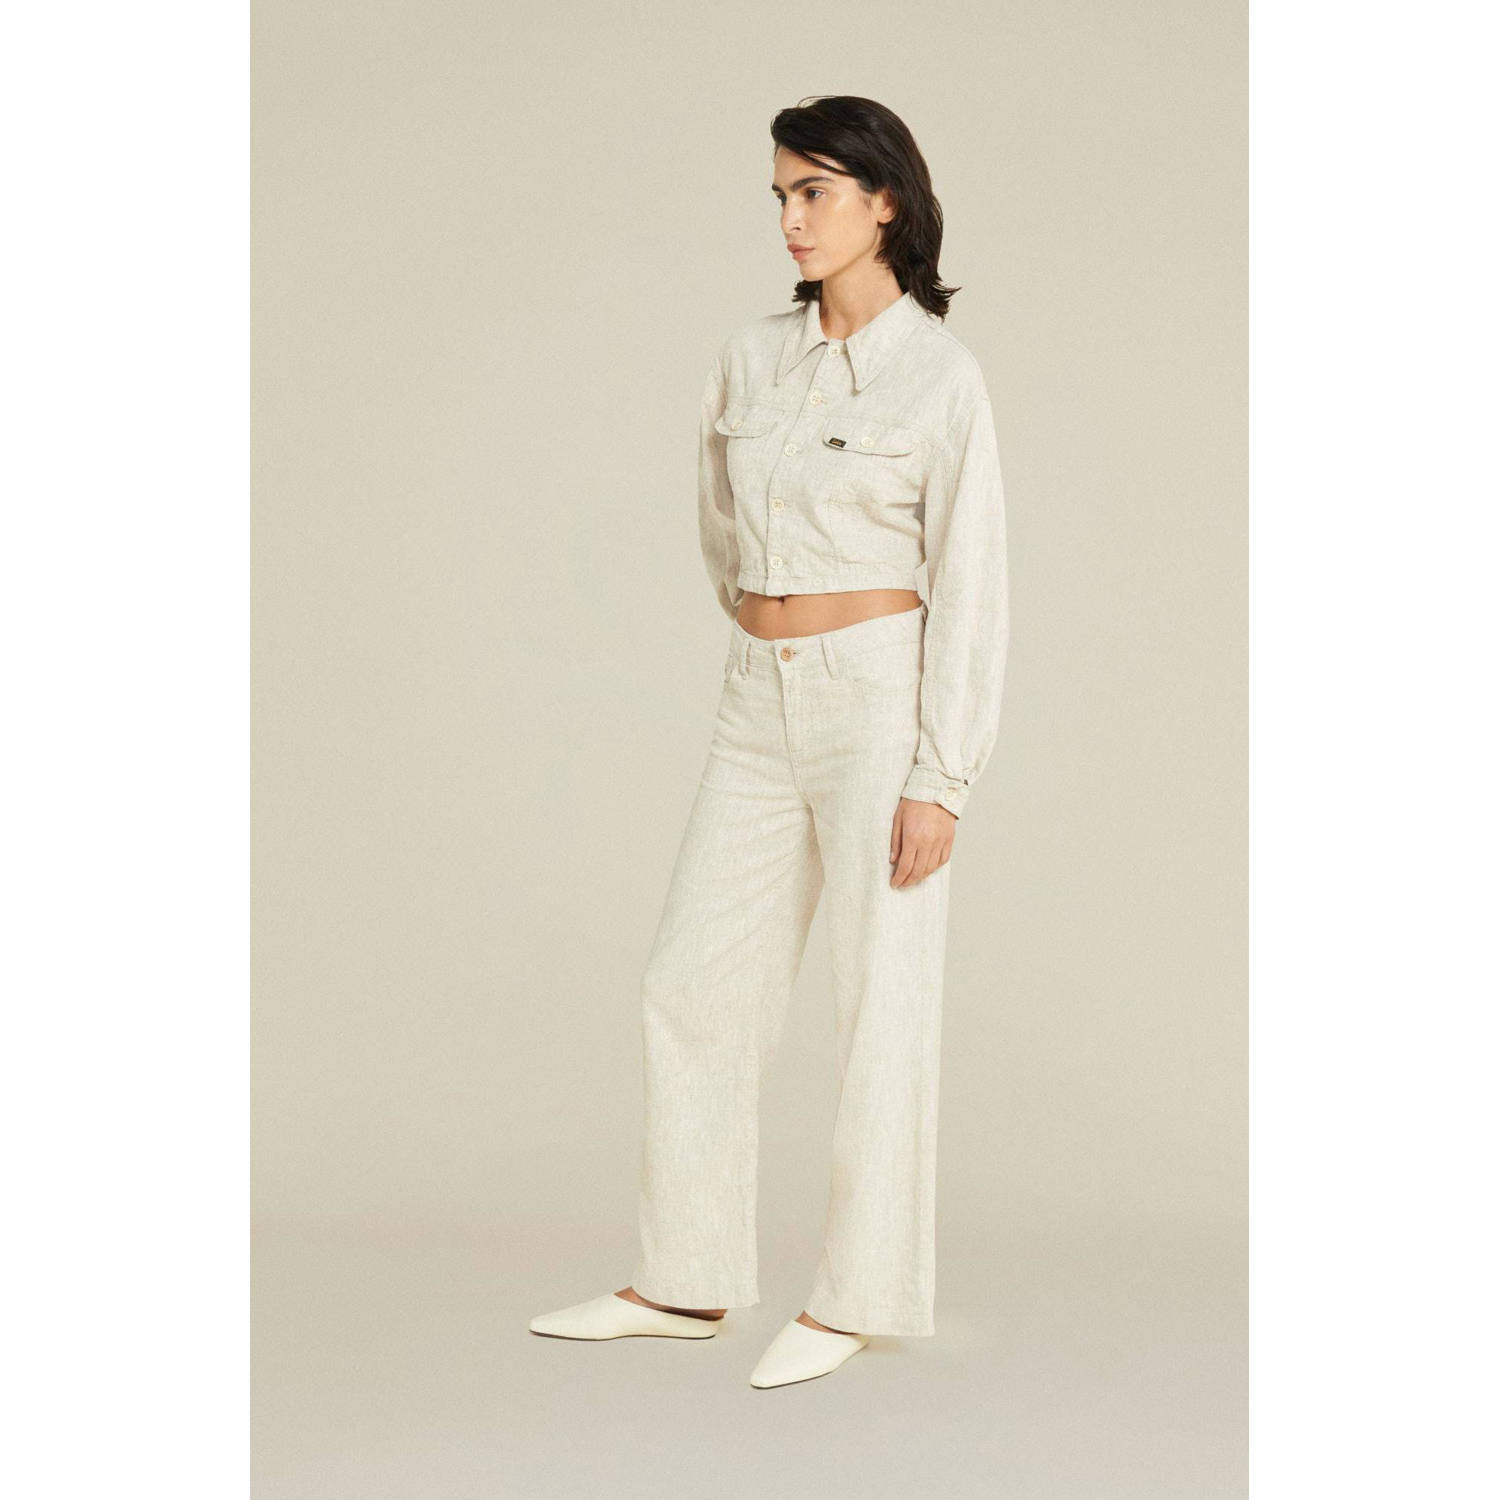 Lois straight jeans Culotte rinse natural